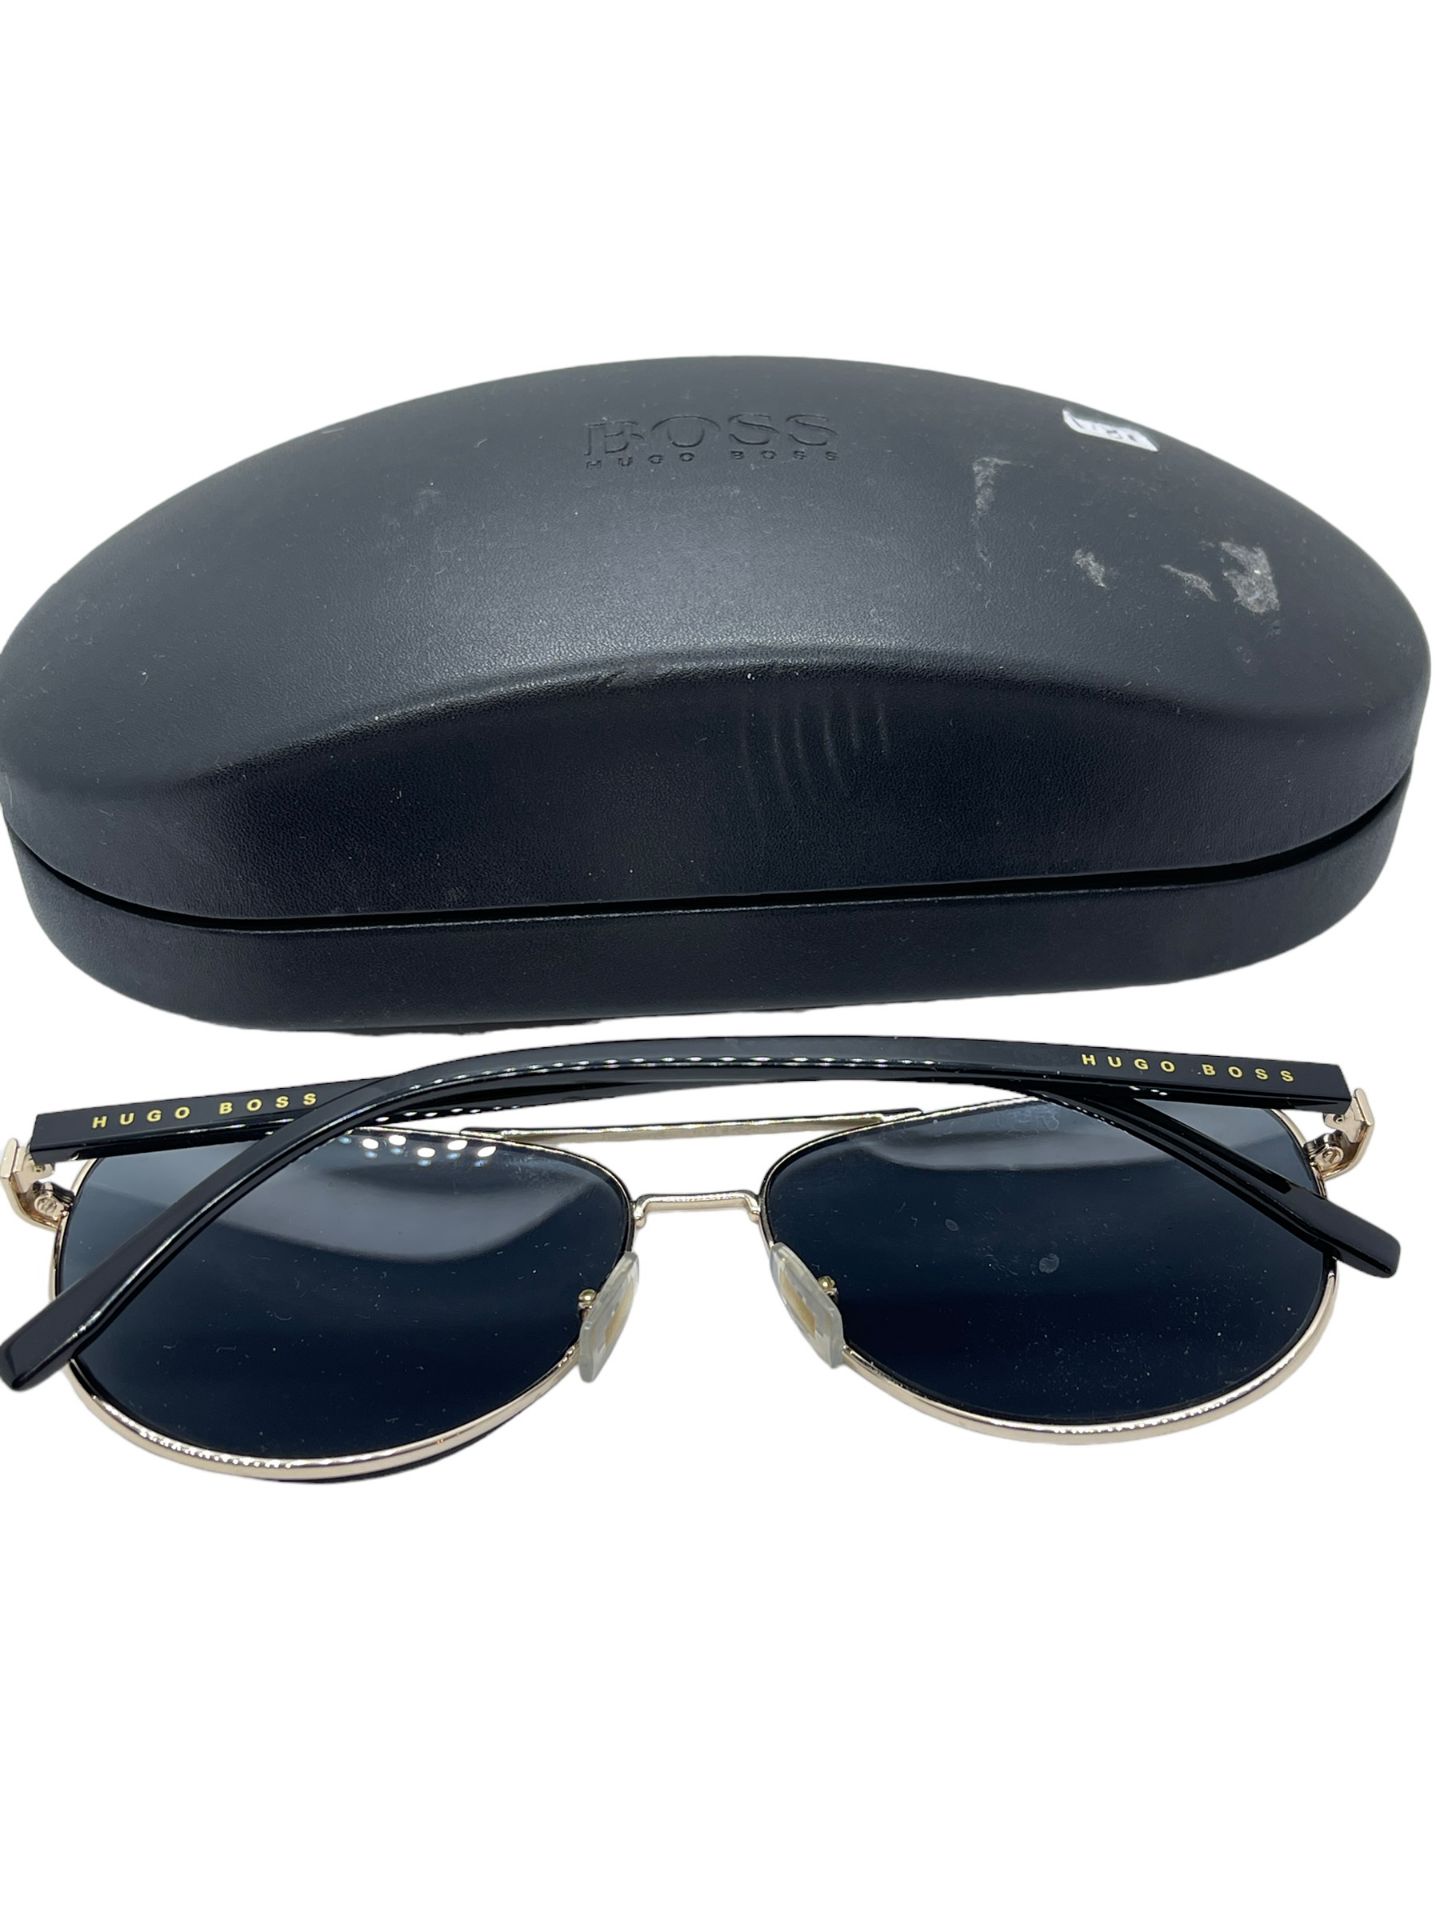 Hugo Boss Sunglasses gold plated aviators with case surplus stock xdemo - Image 6 of 6